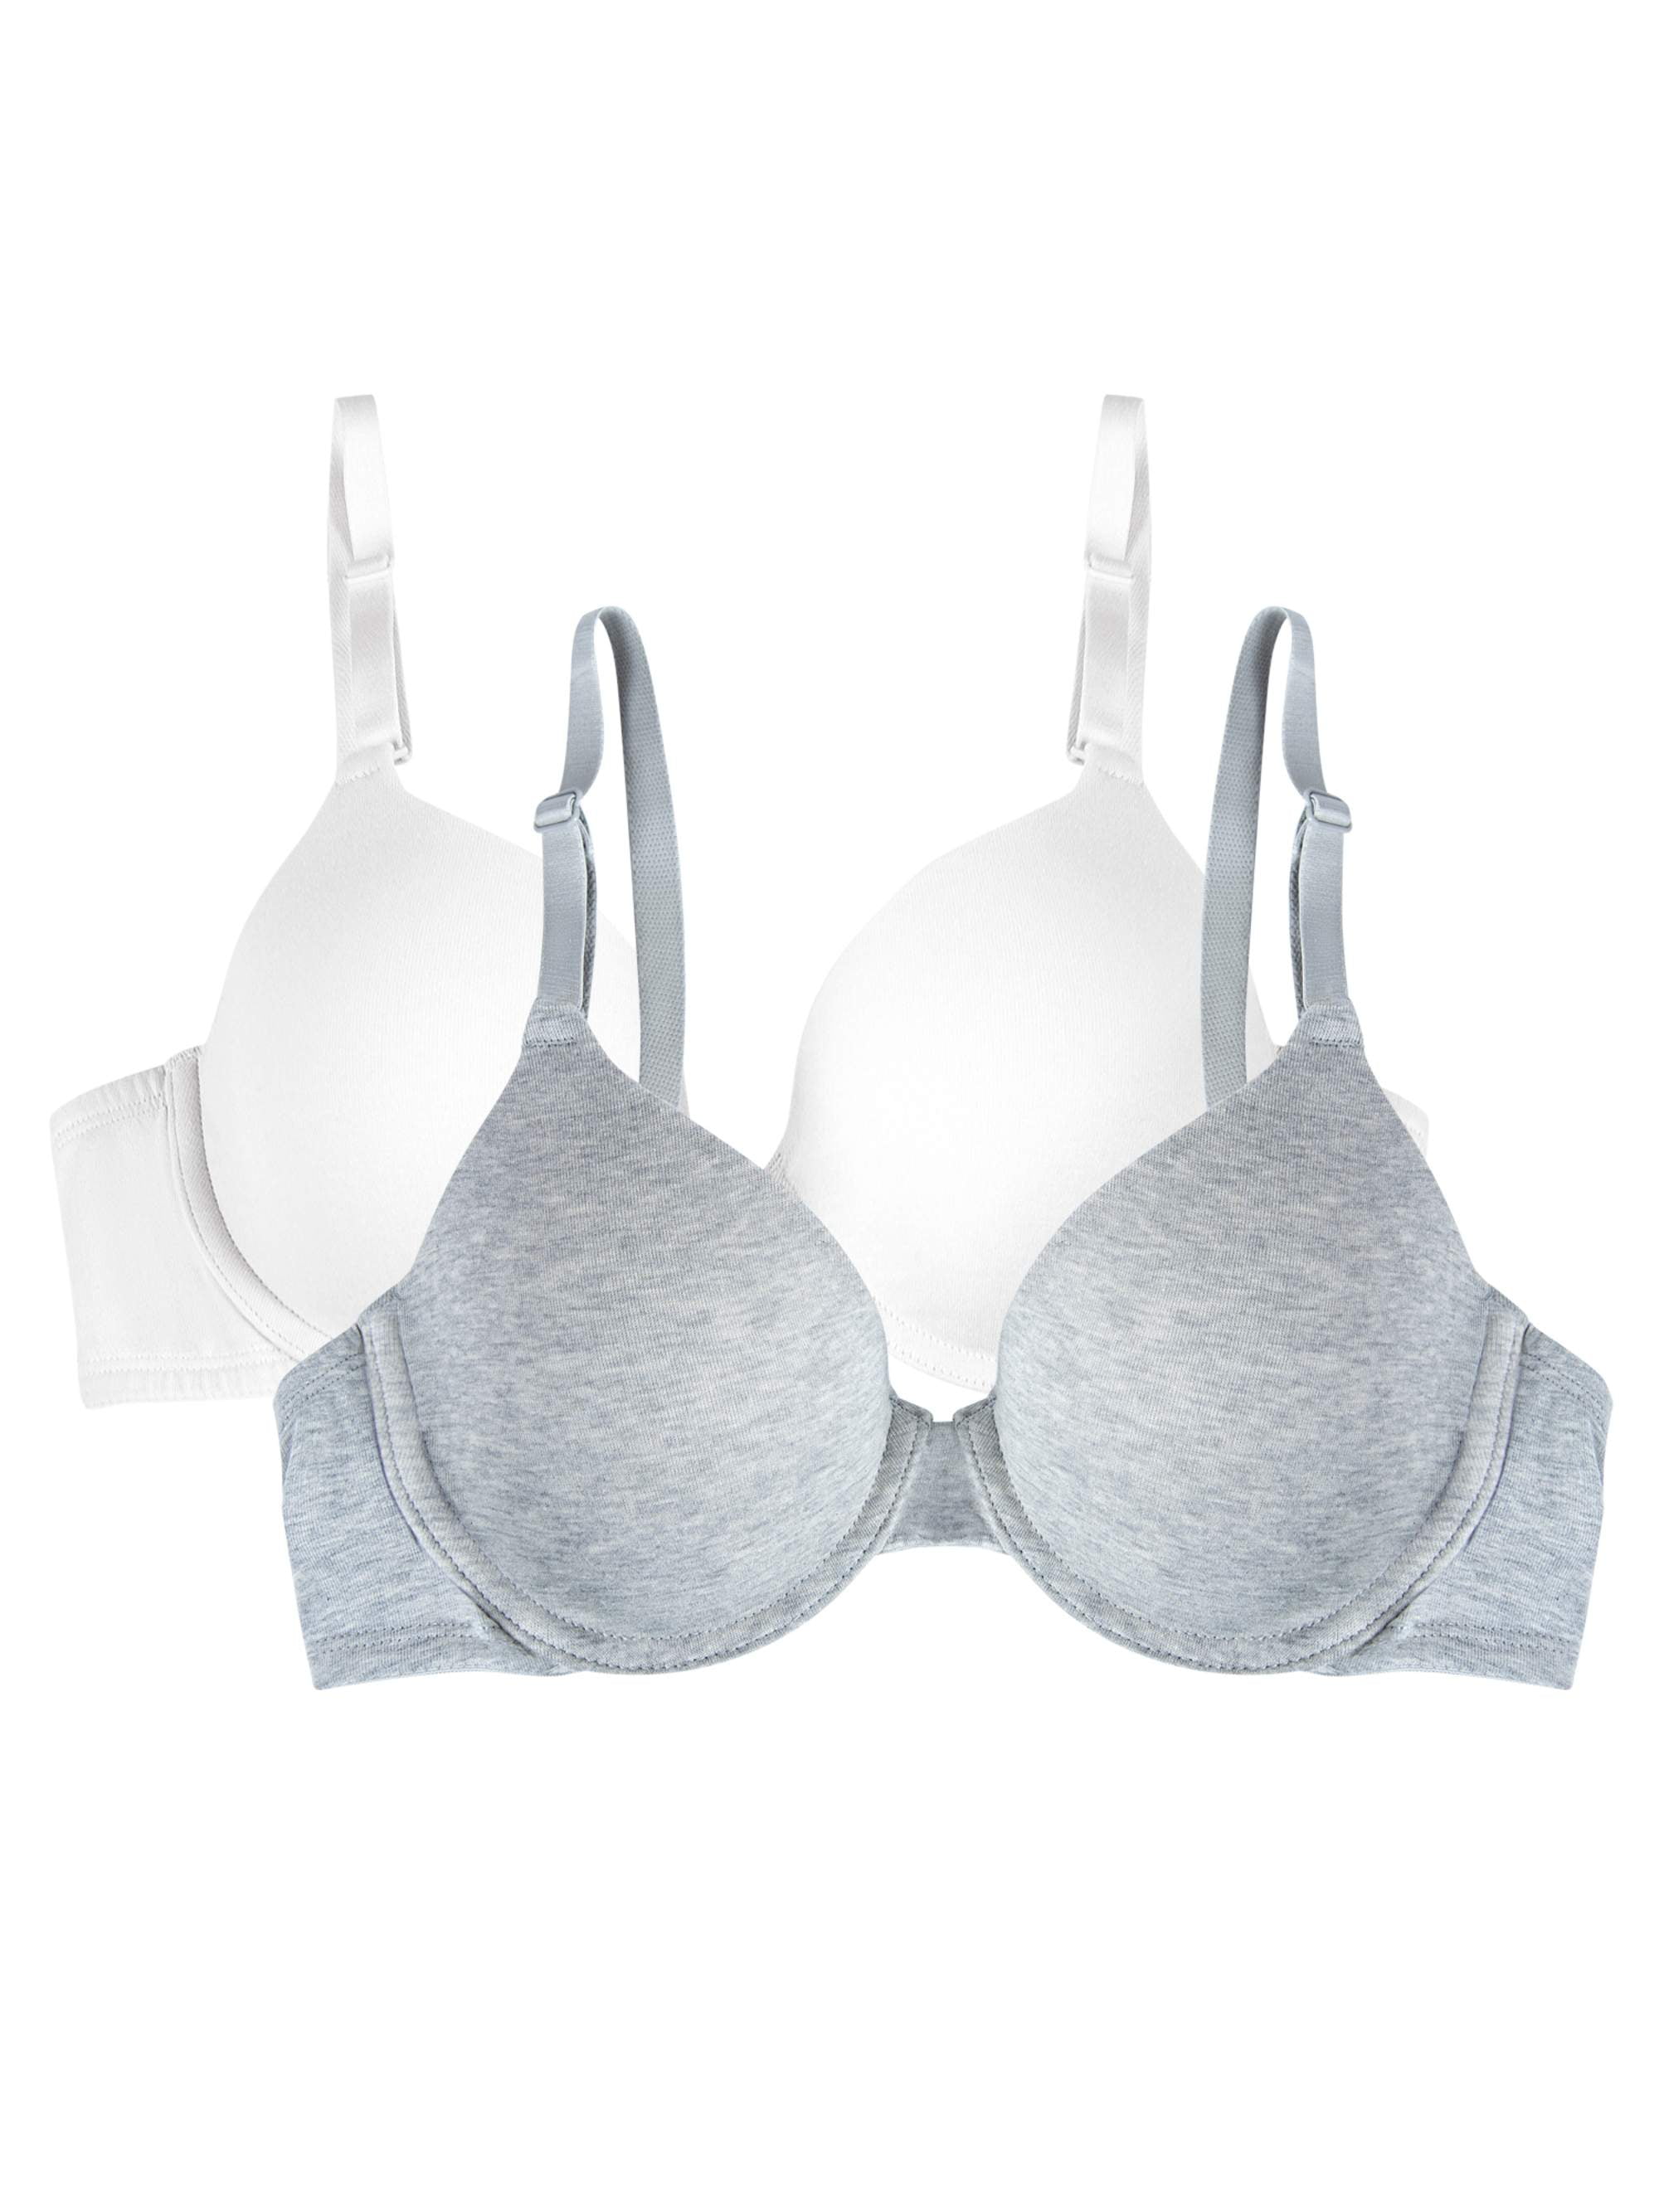 Fruit of the Loom Women's Unlined Underwire Bra Pack of 2 